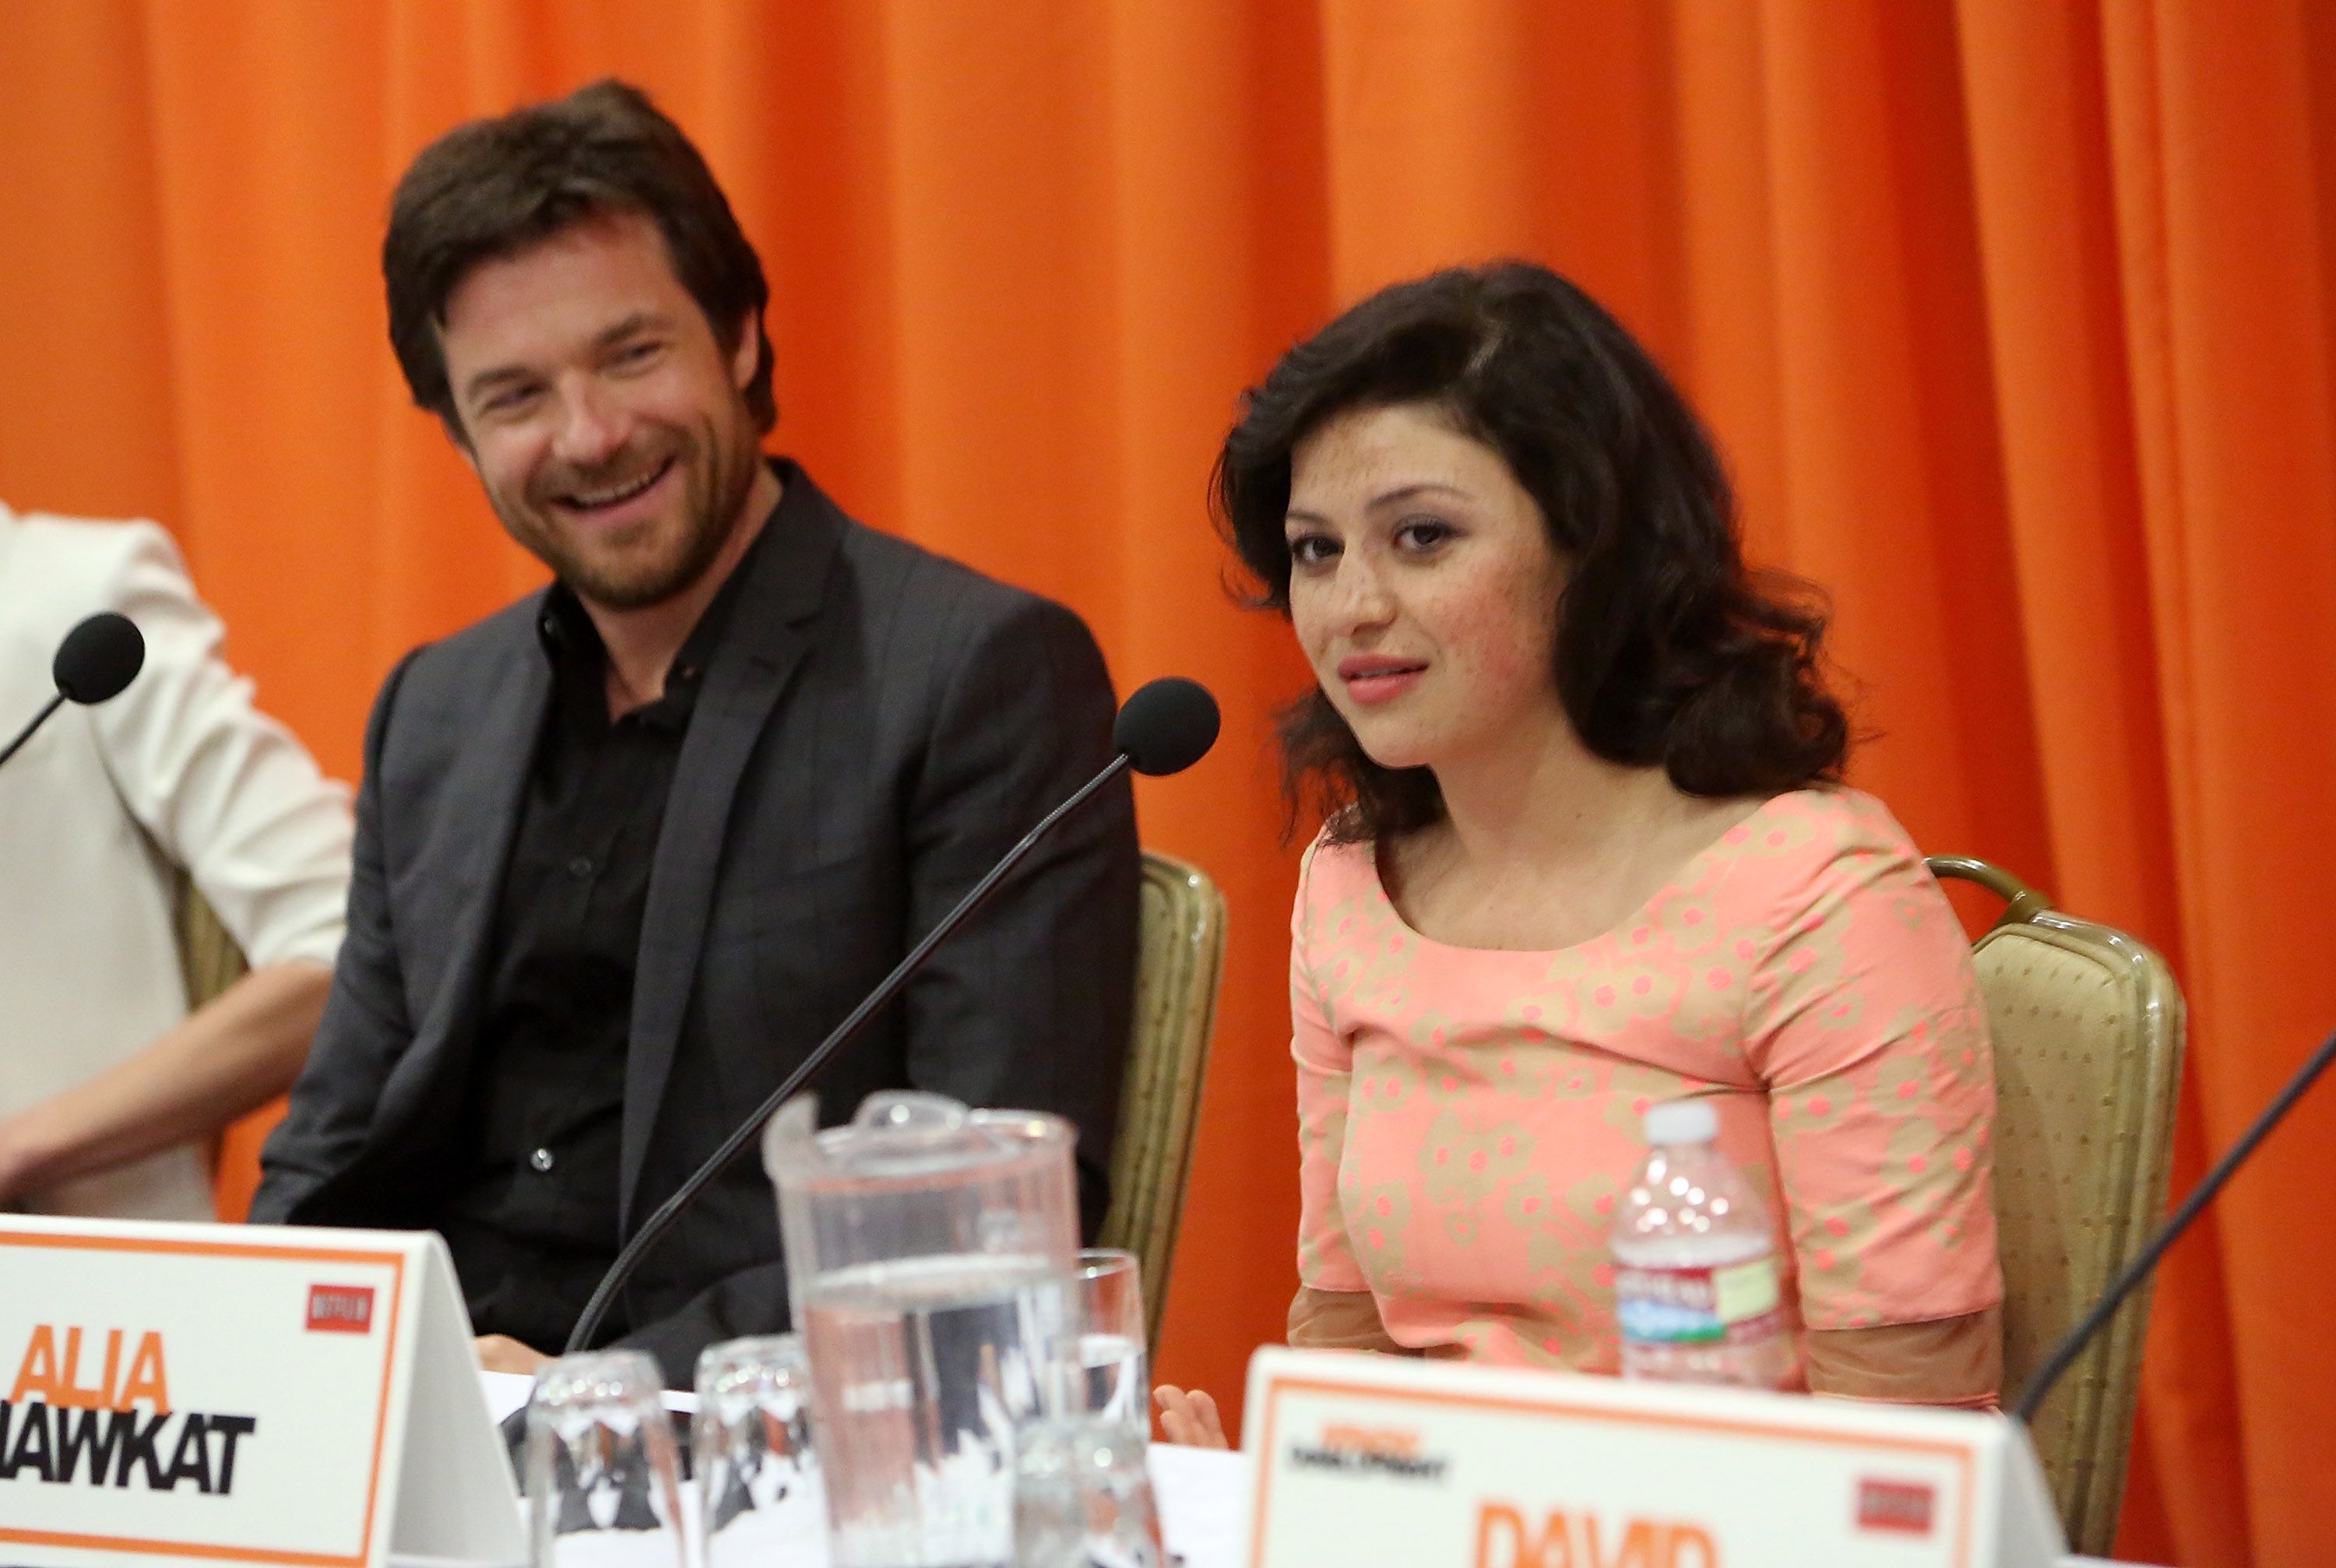 Jason Bateman and Alia Shawkat at the Arrested Development Season 4 press conferenceJason Bateman also spoke to the notion that fans don't necessarily have to watch all 15 episodes in exact order.